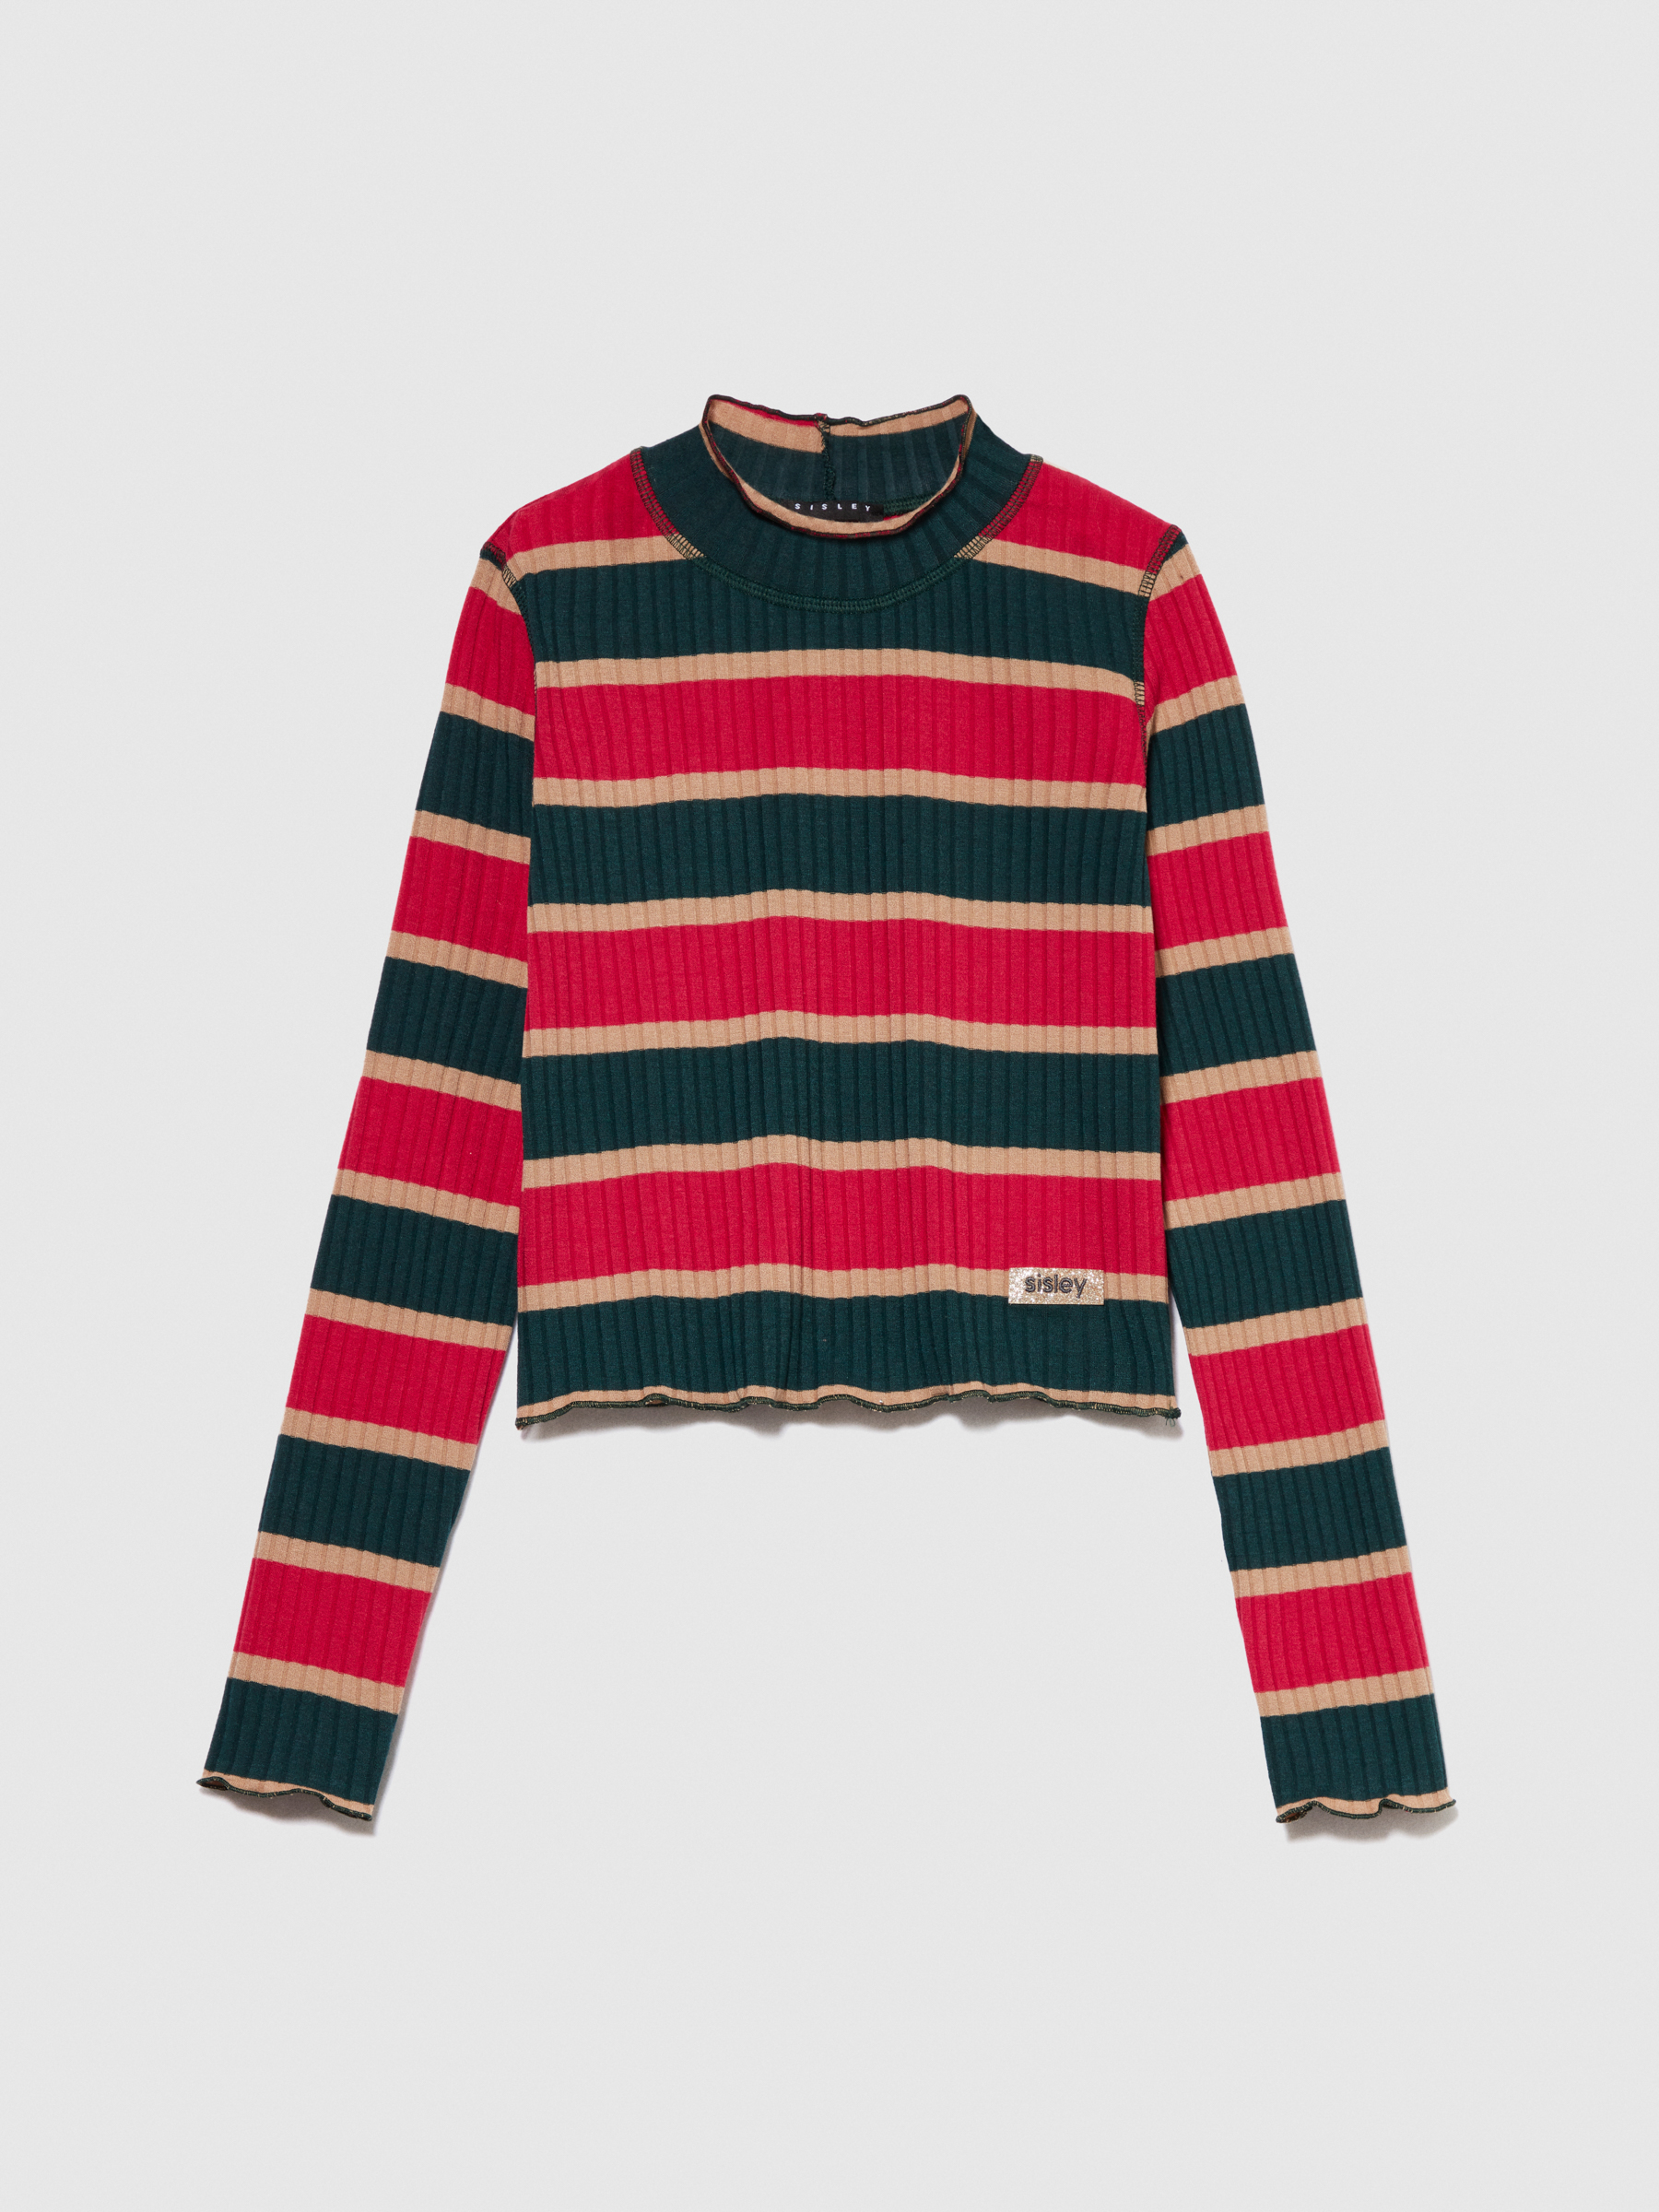 Sisley Young - Striped Turtleneck T-shirt, Woman, Multi-color, Size: XS